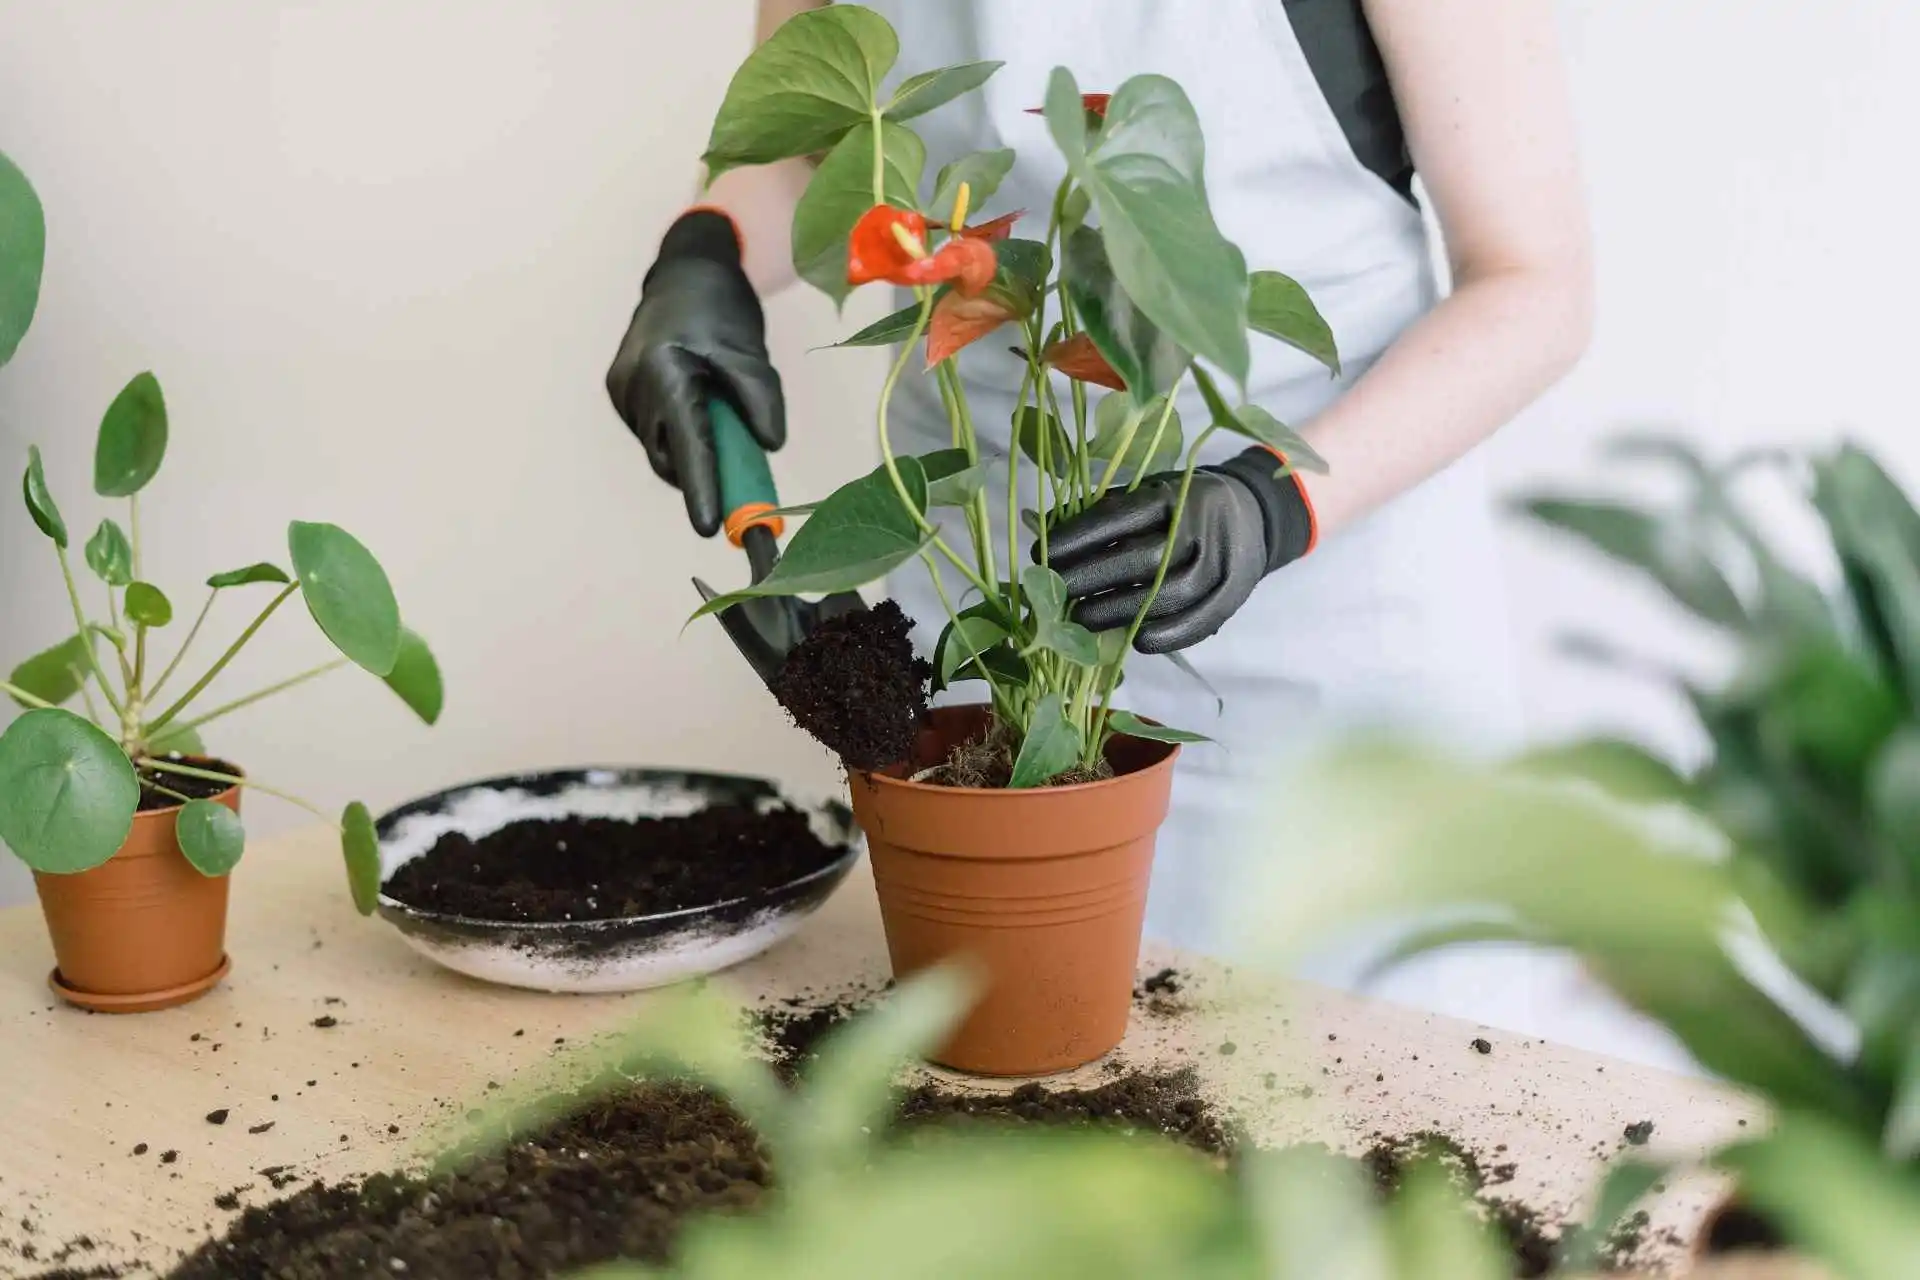 Eco how to repot houseplants properly